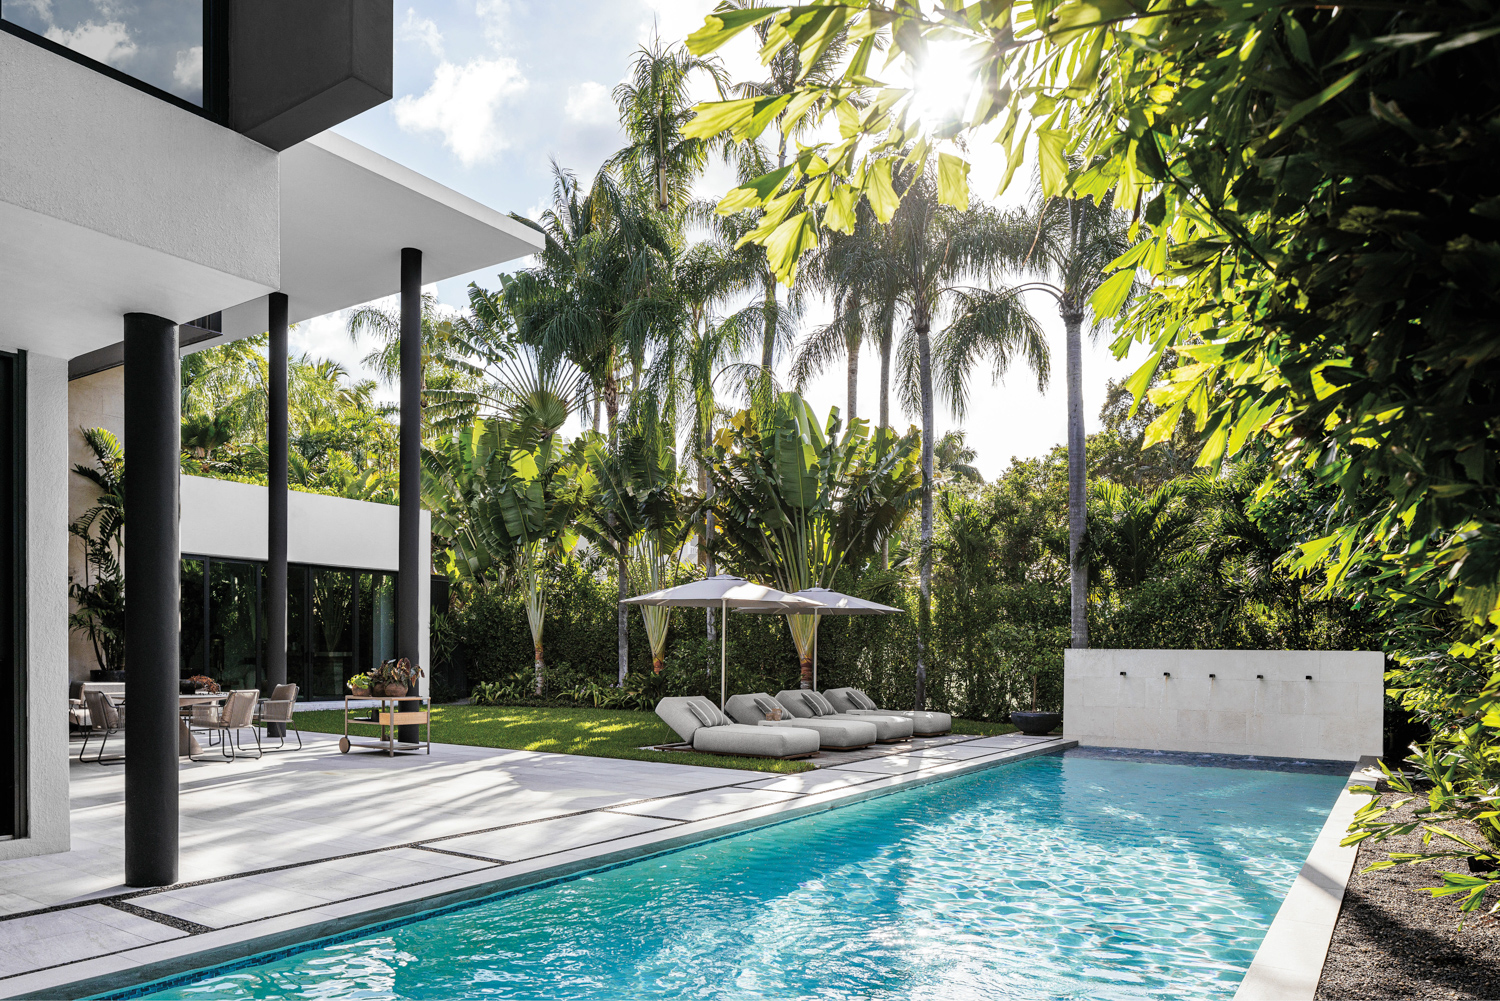 backyard pool lined with white umbrellas, lounge chairs, palm trees, shrubs and a trolley